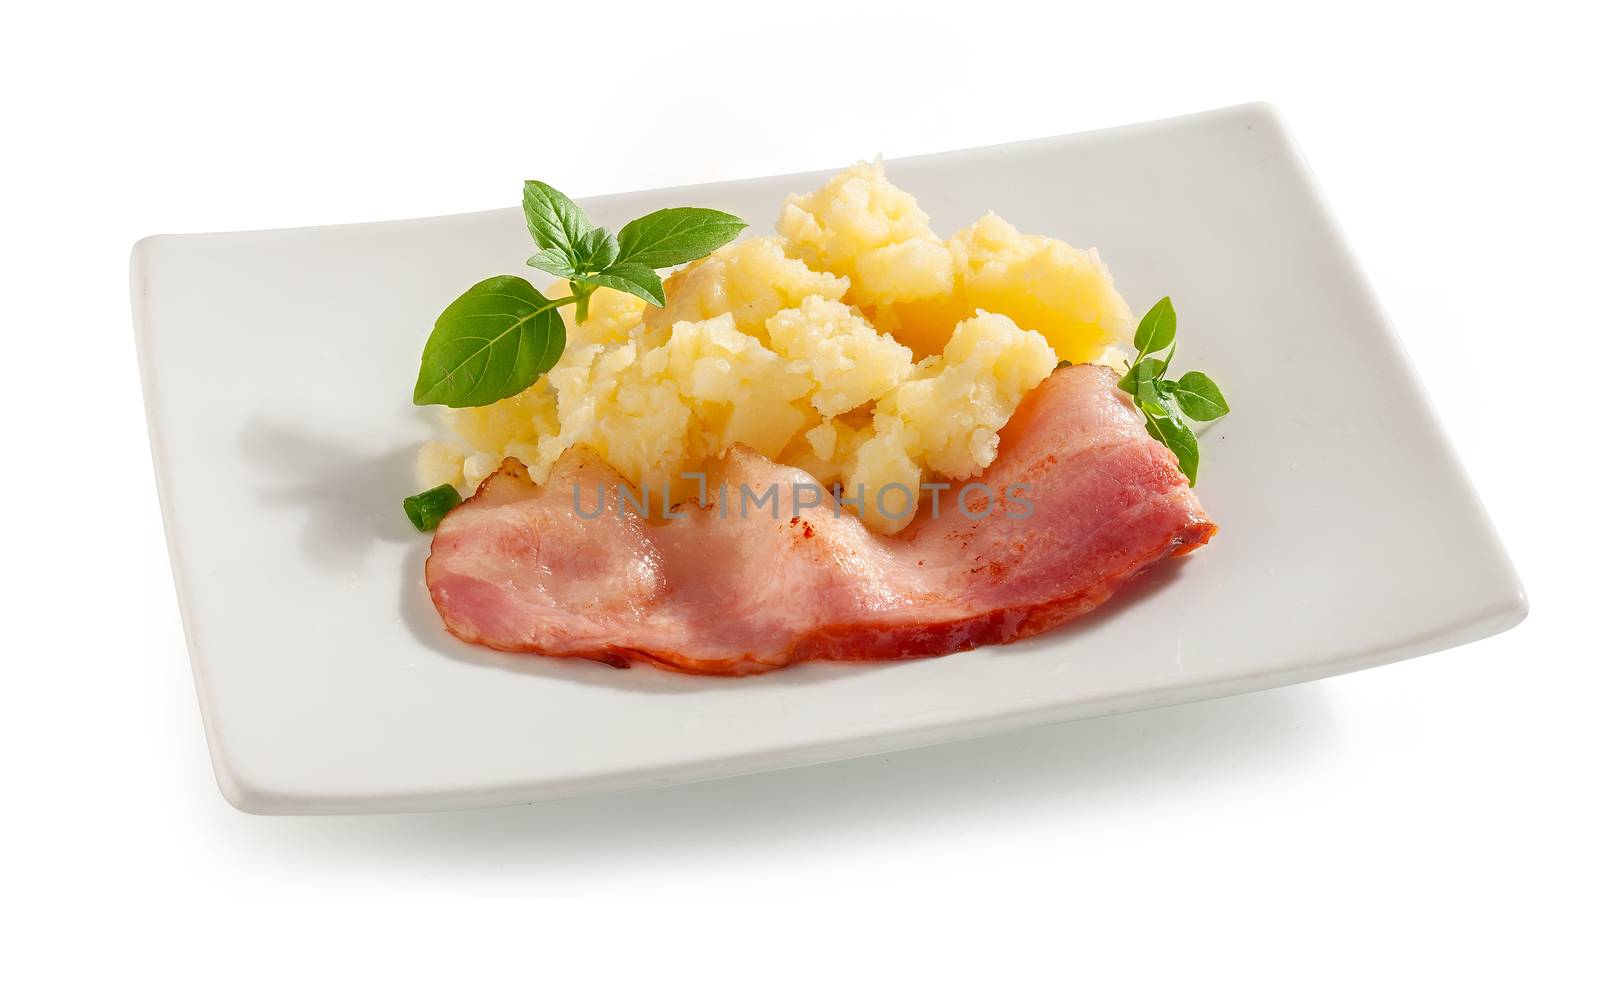 Mashed potatoes with bacon by Angorius